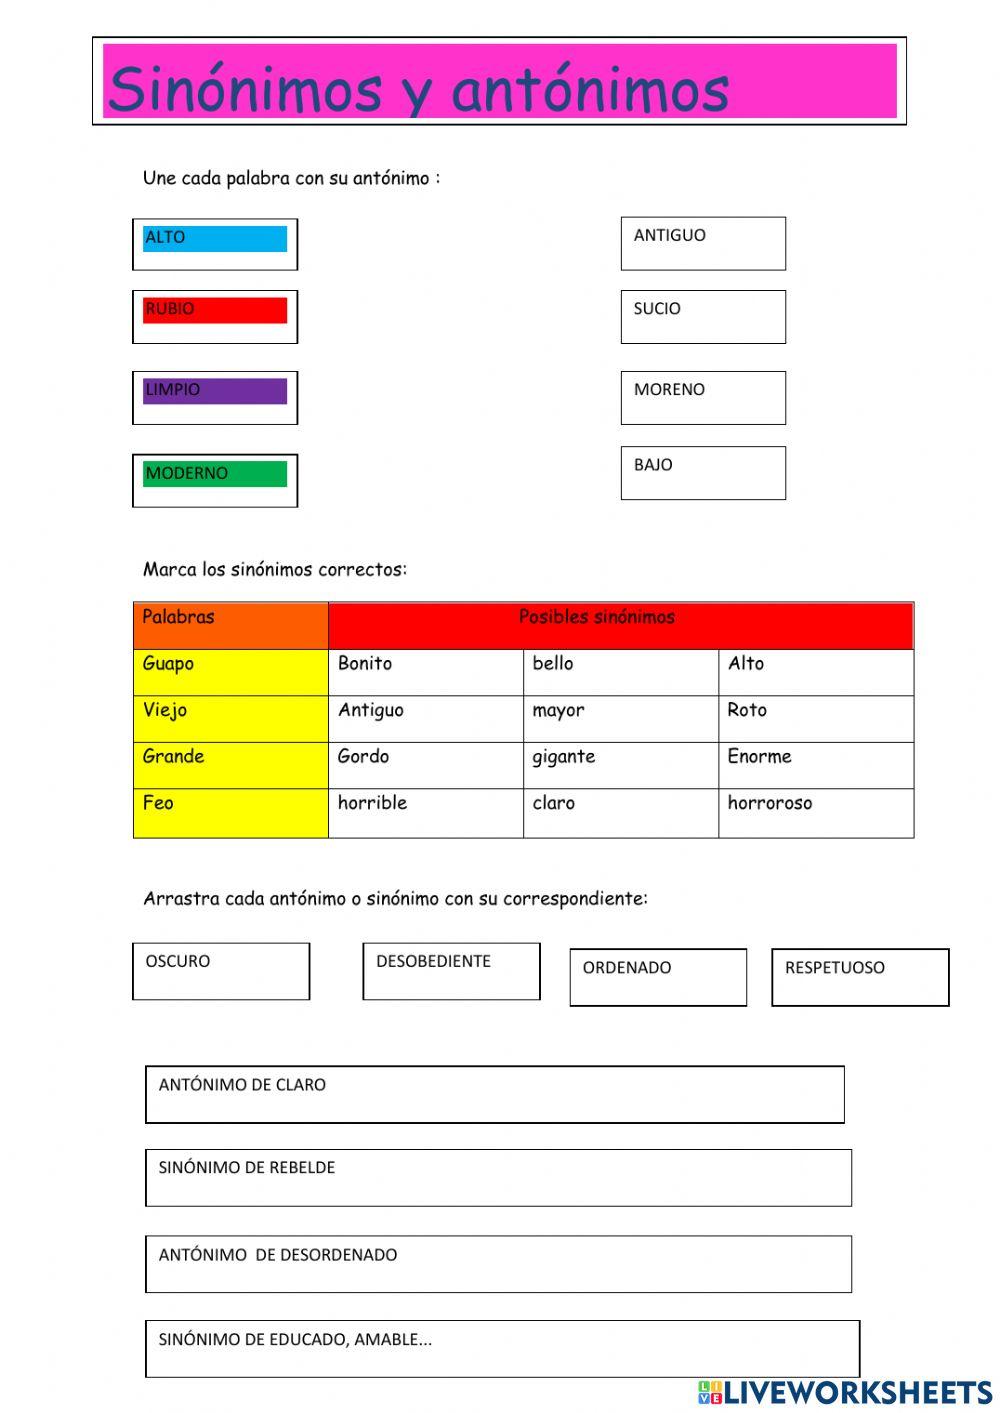 Antónimos y sinónimos interactive activity | Live Worksheets